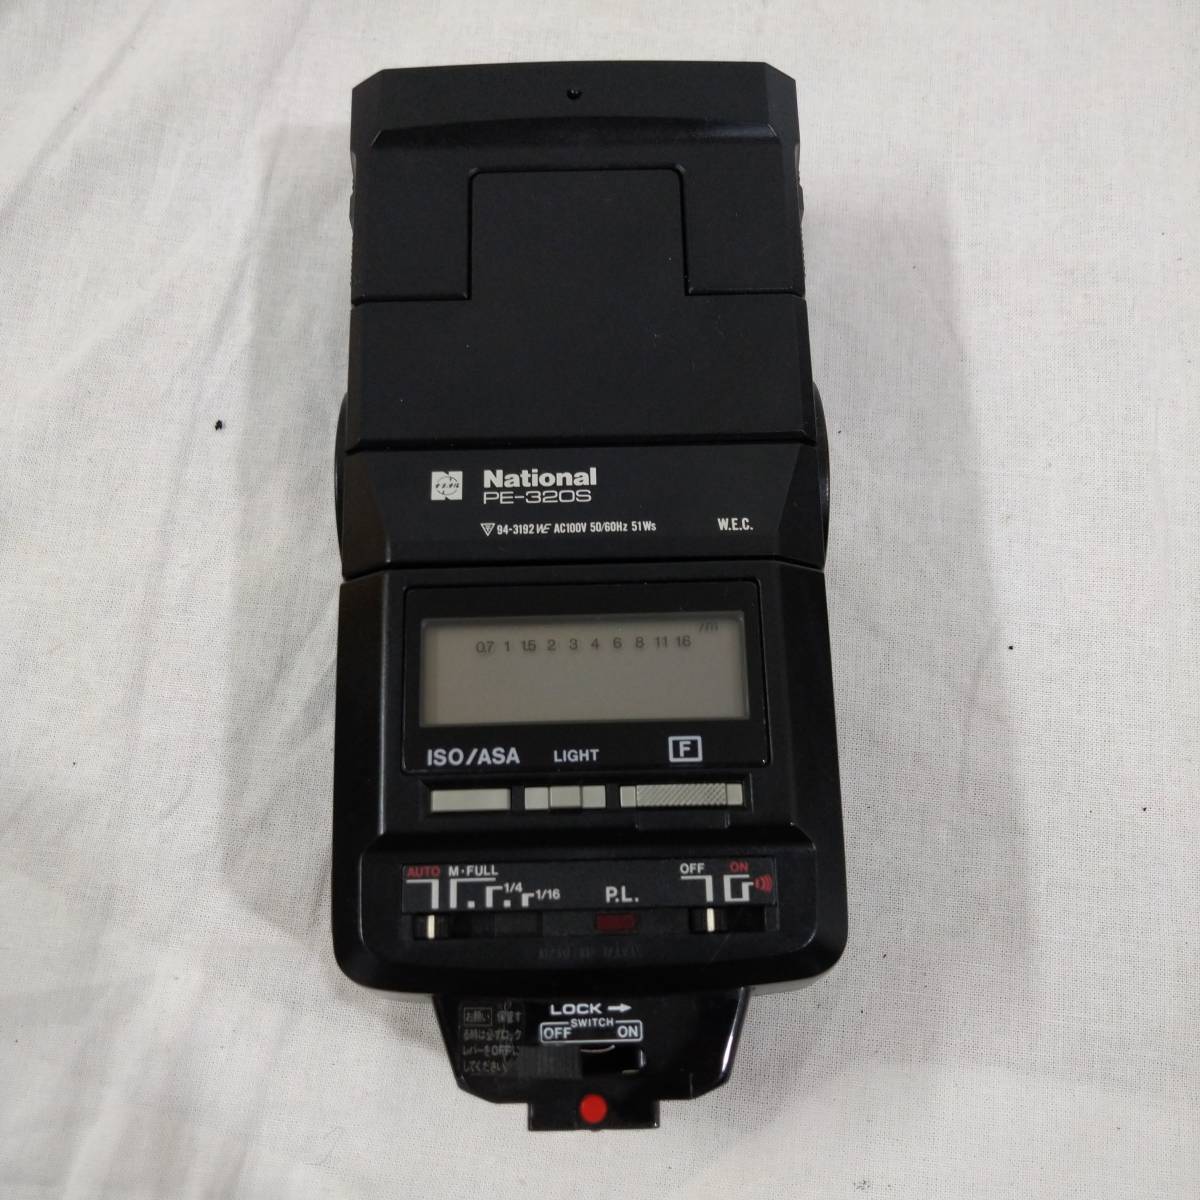 [National] National strobo toPE-320S flash strobo manual attaching [ film camera parts peripherals machinery photograph single‐lens reflex ]30